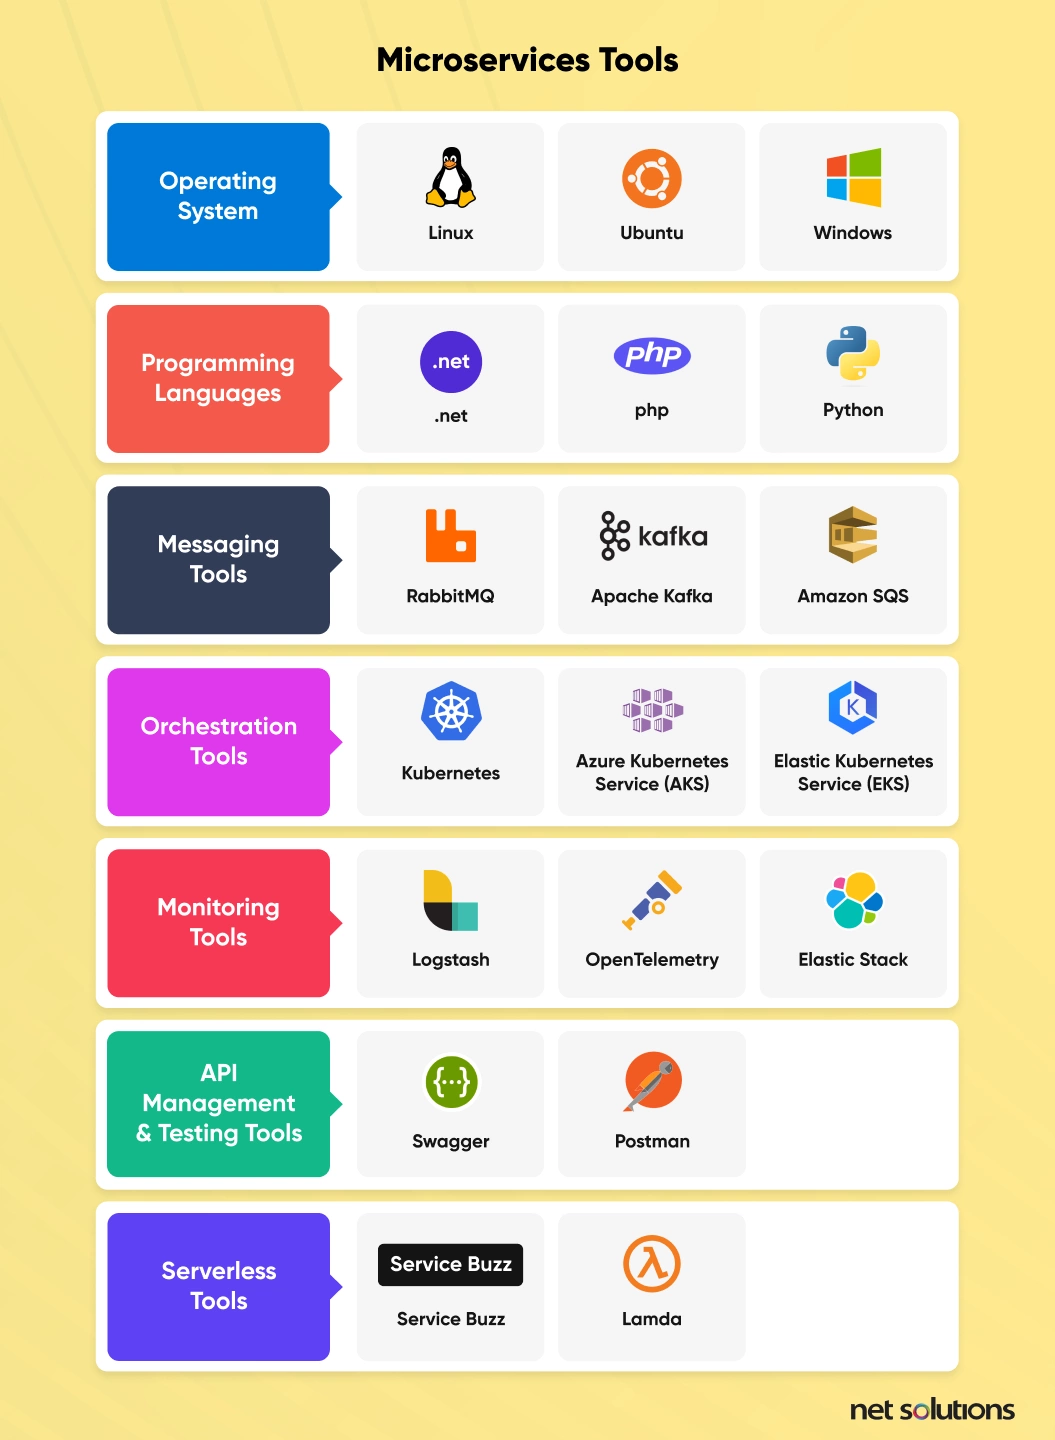 Microservices tools